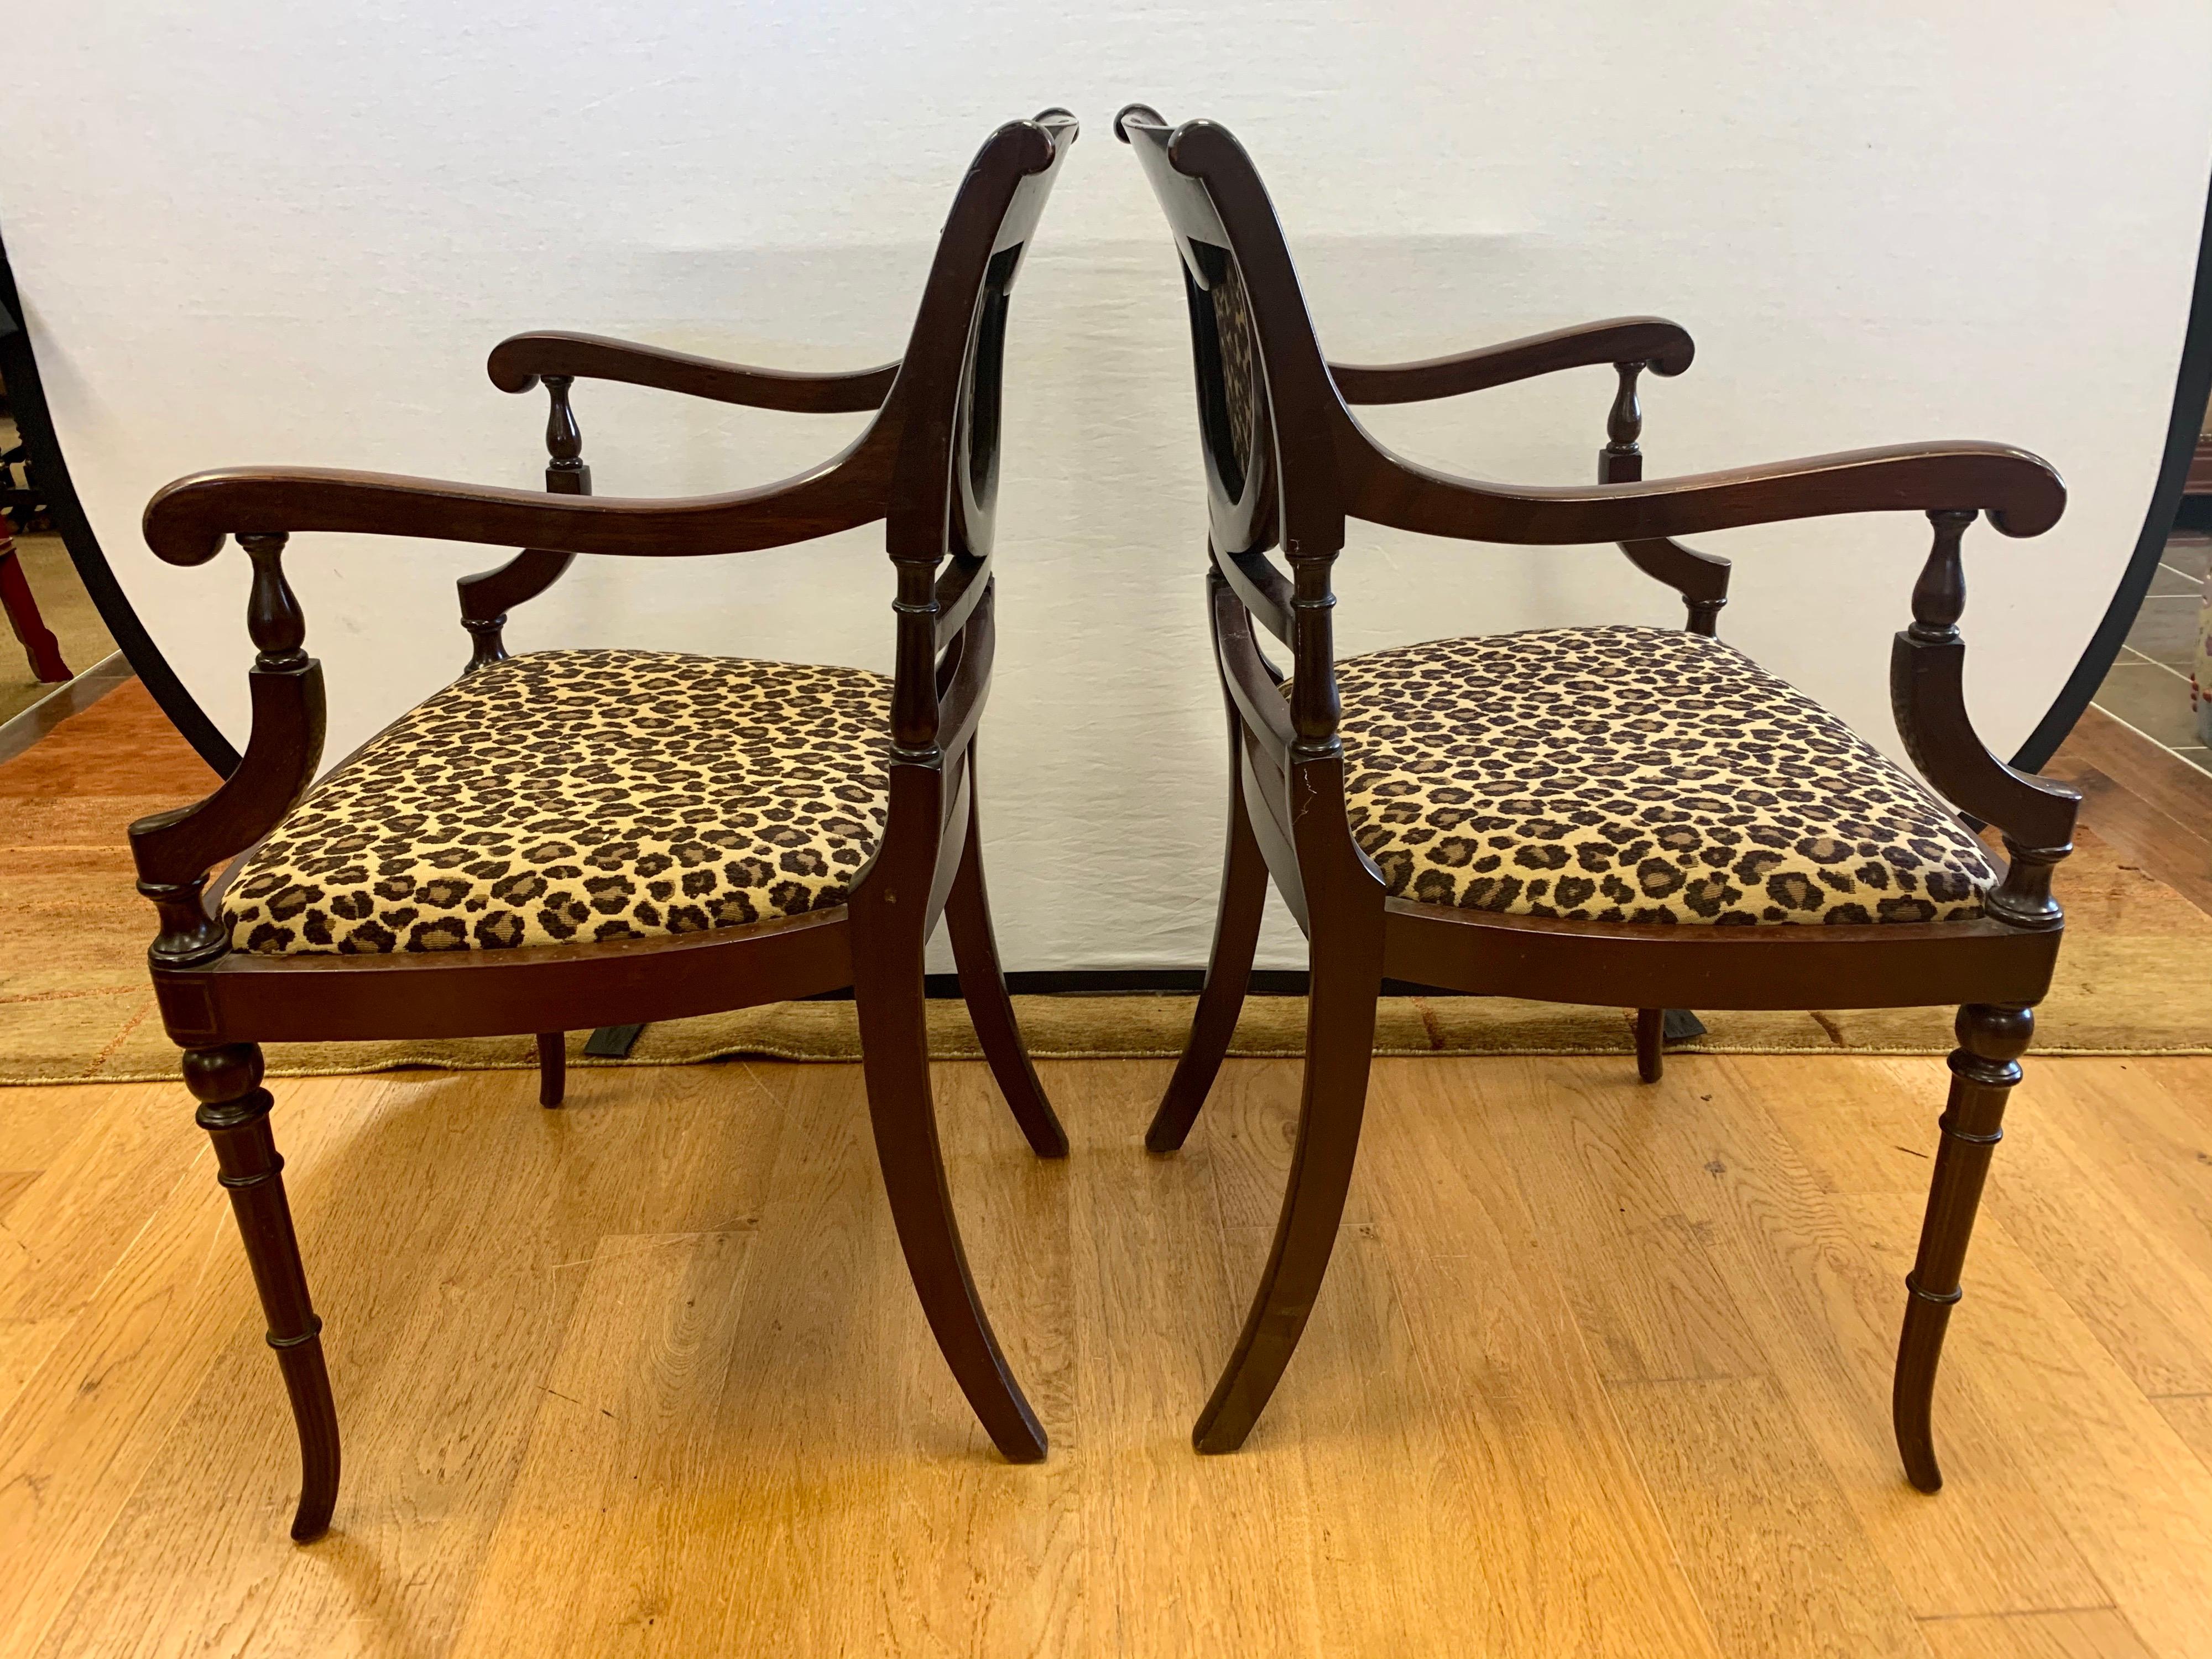 Federal Mahogany Armchairs Armchairs Newly Upholstered in Leopard Fabric 1